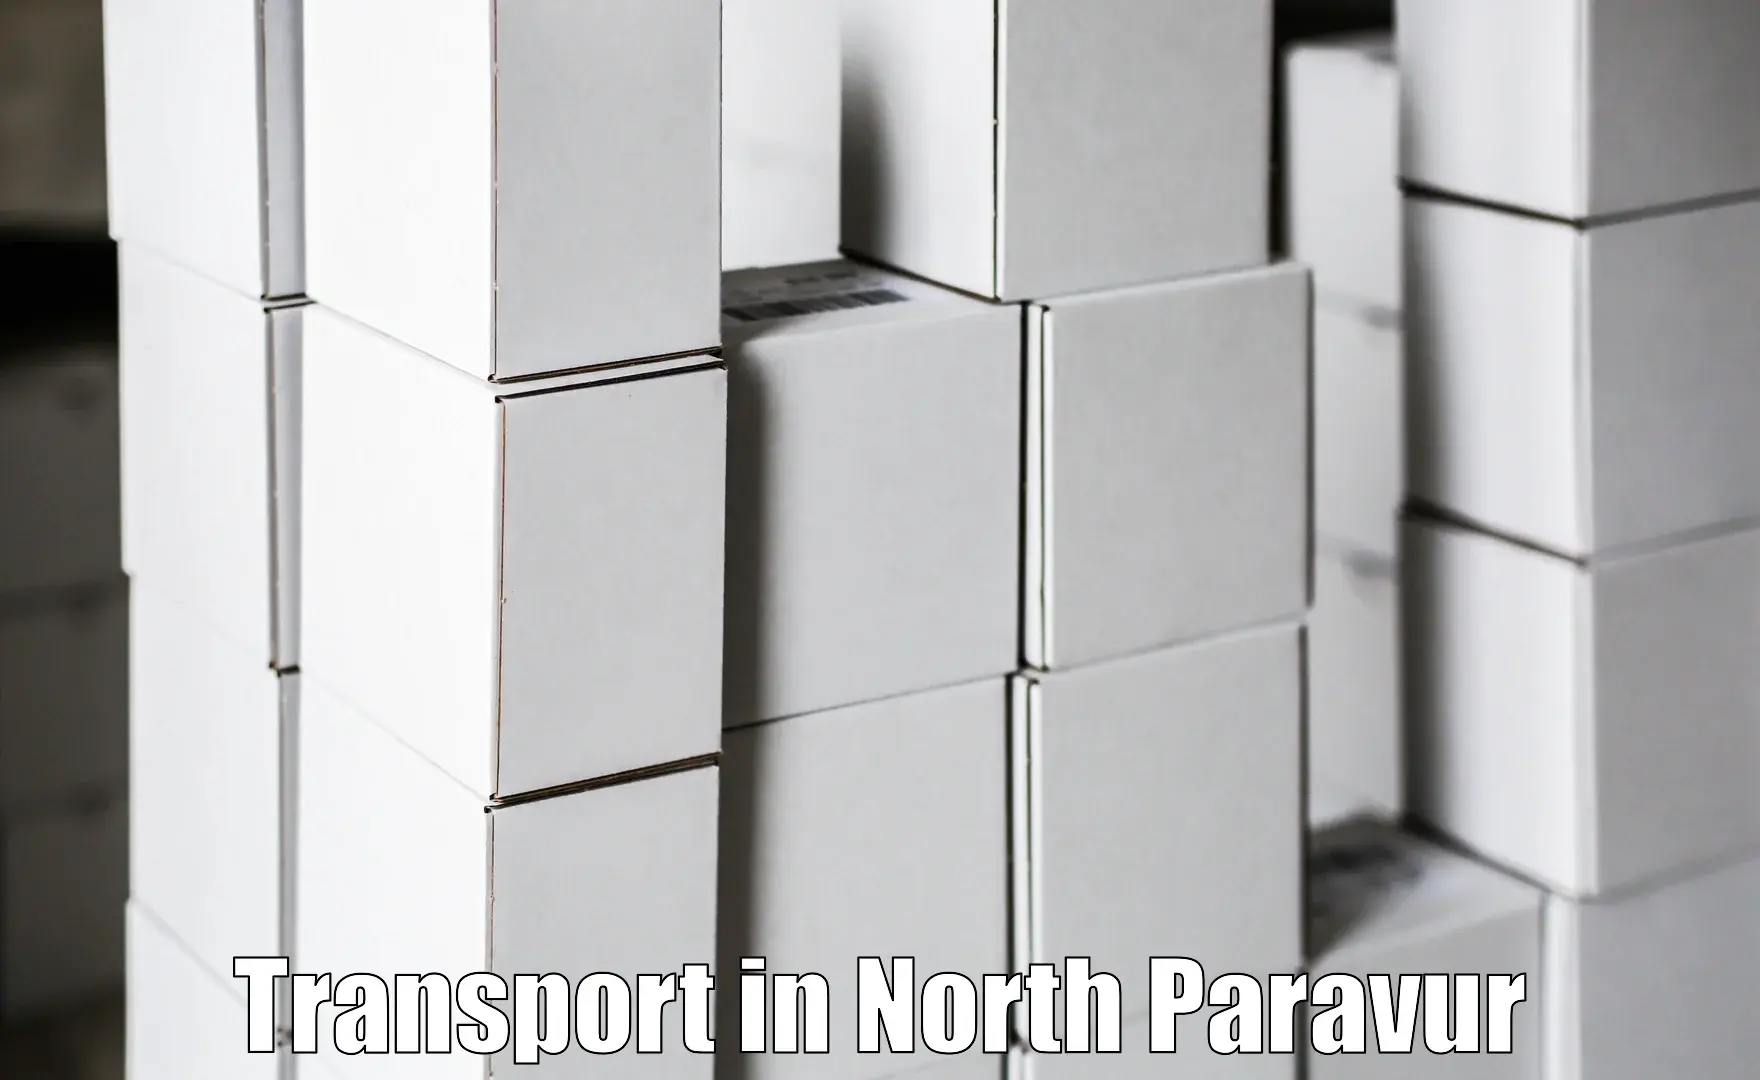 Container transport service in North Paravur